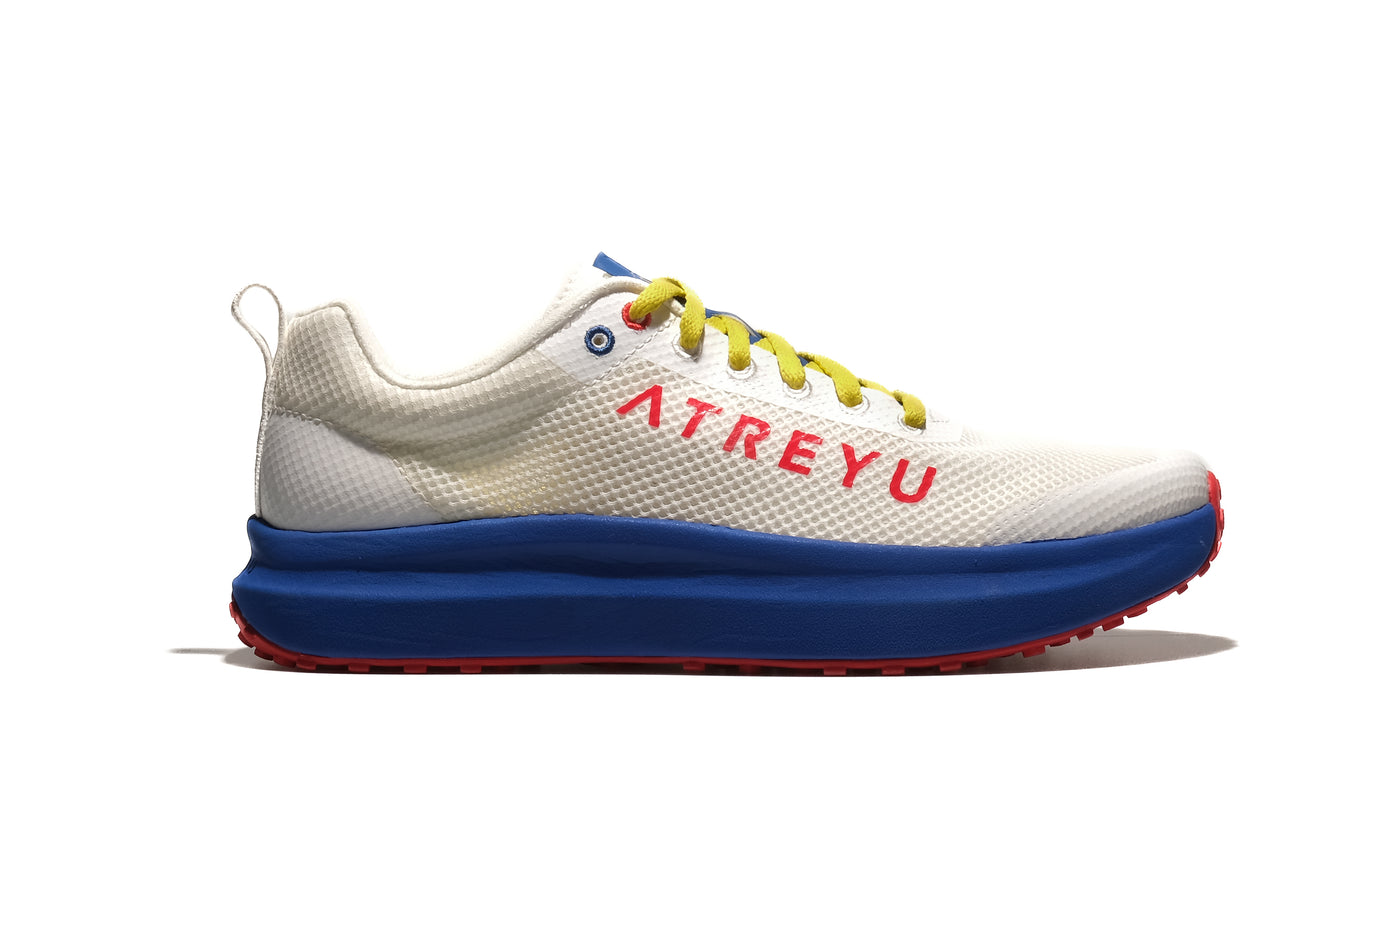 Daily Trainer - Atreyu Running Shoes Side two